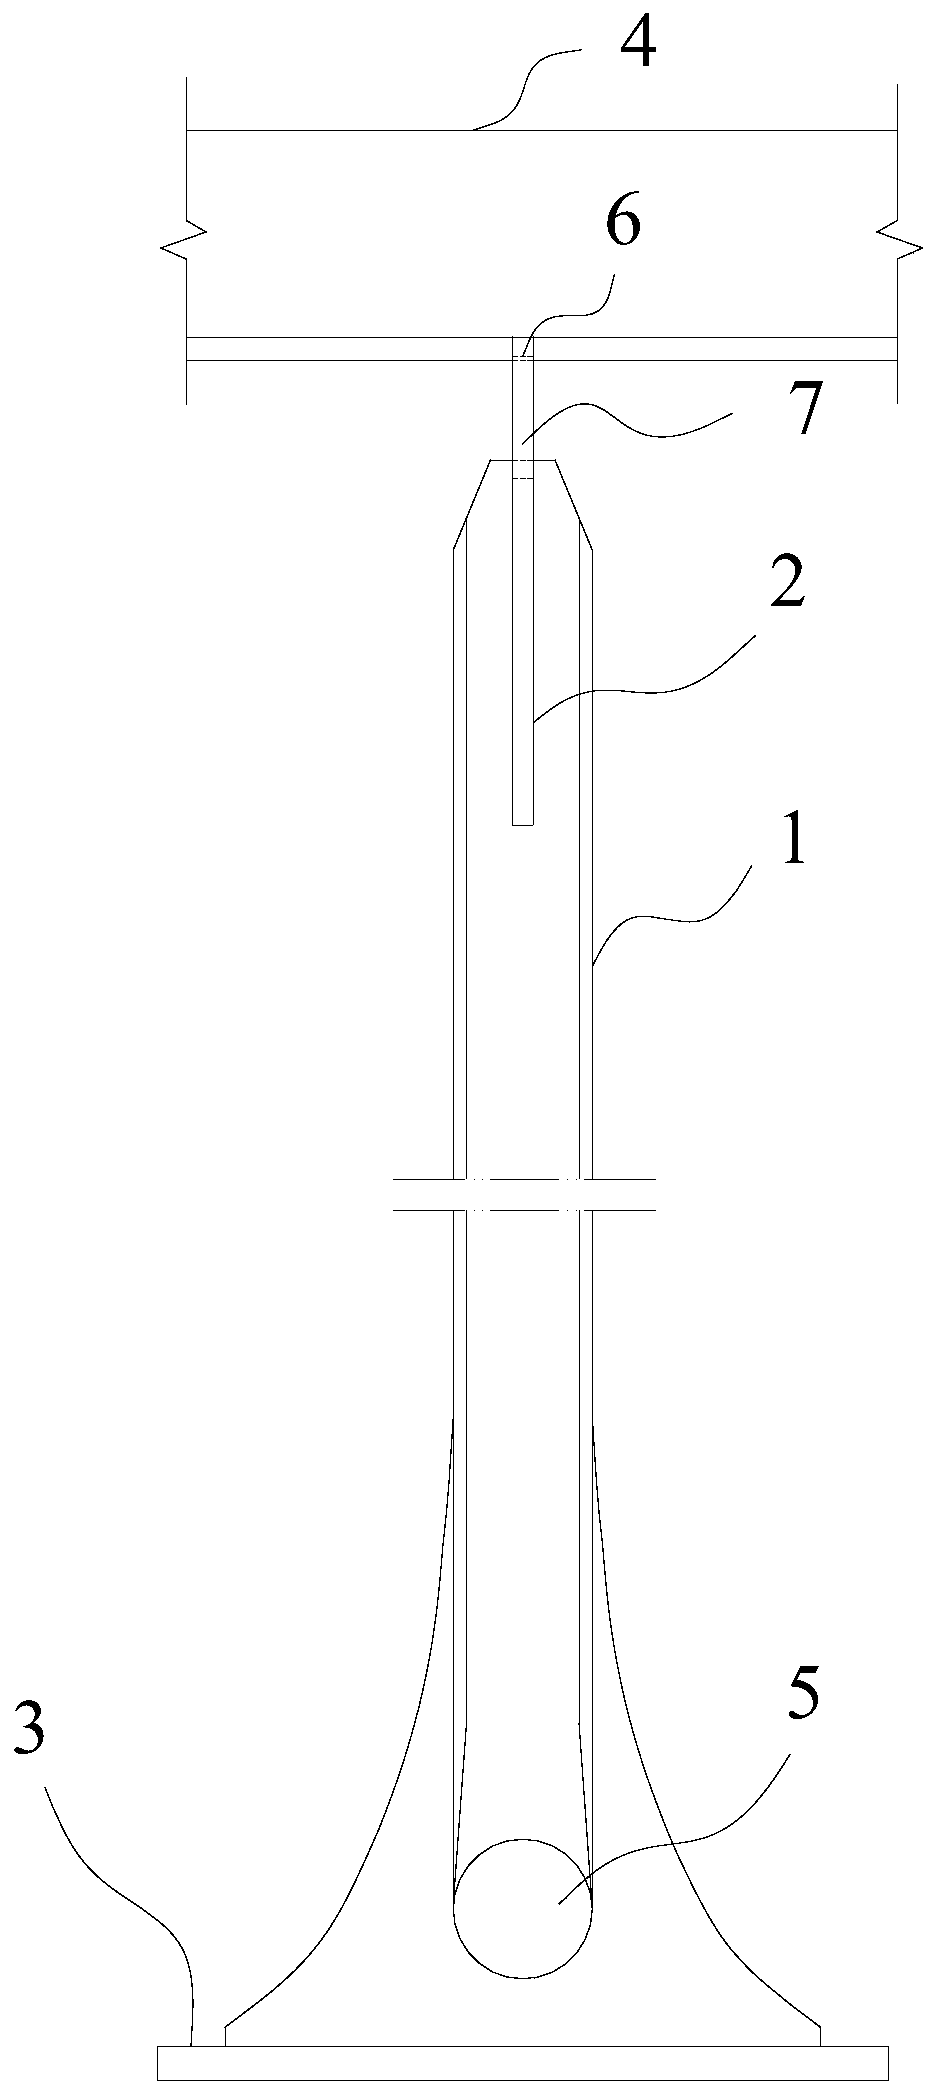 A solid web type rigid suspender and its installation method